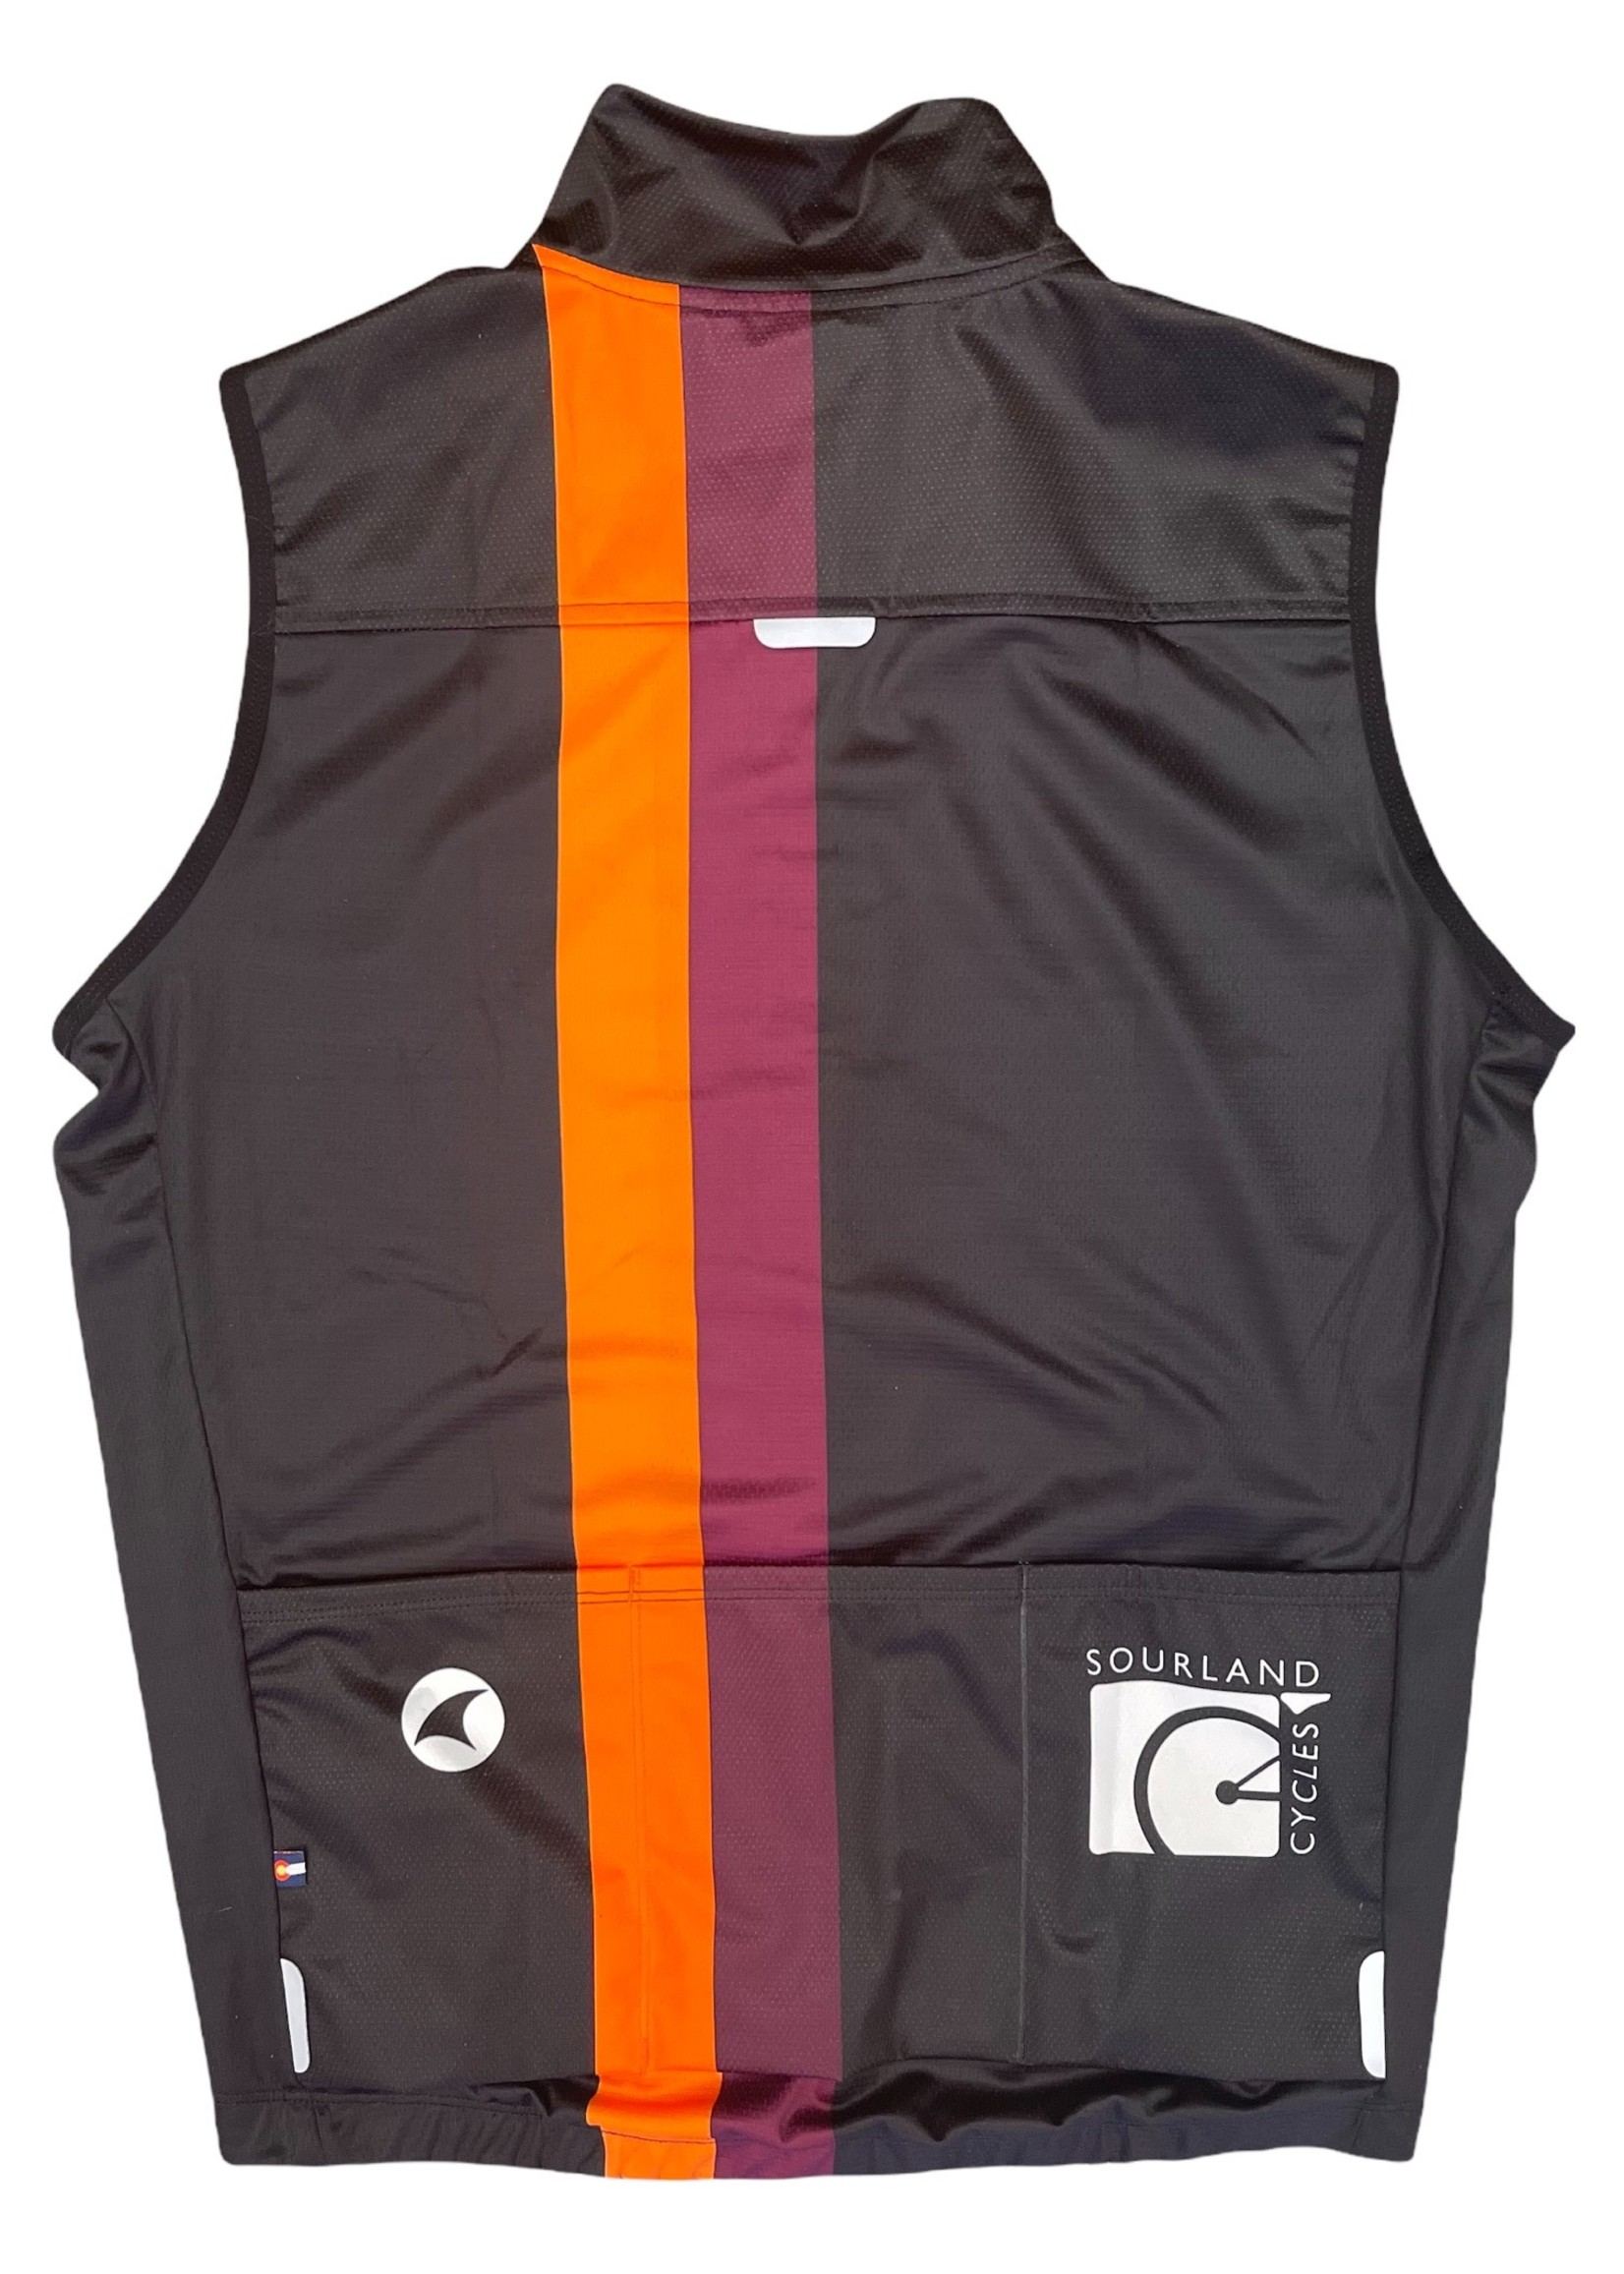 Pactimo Sourland Pactimo Men's Vest